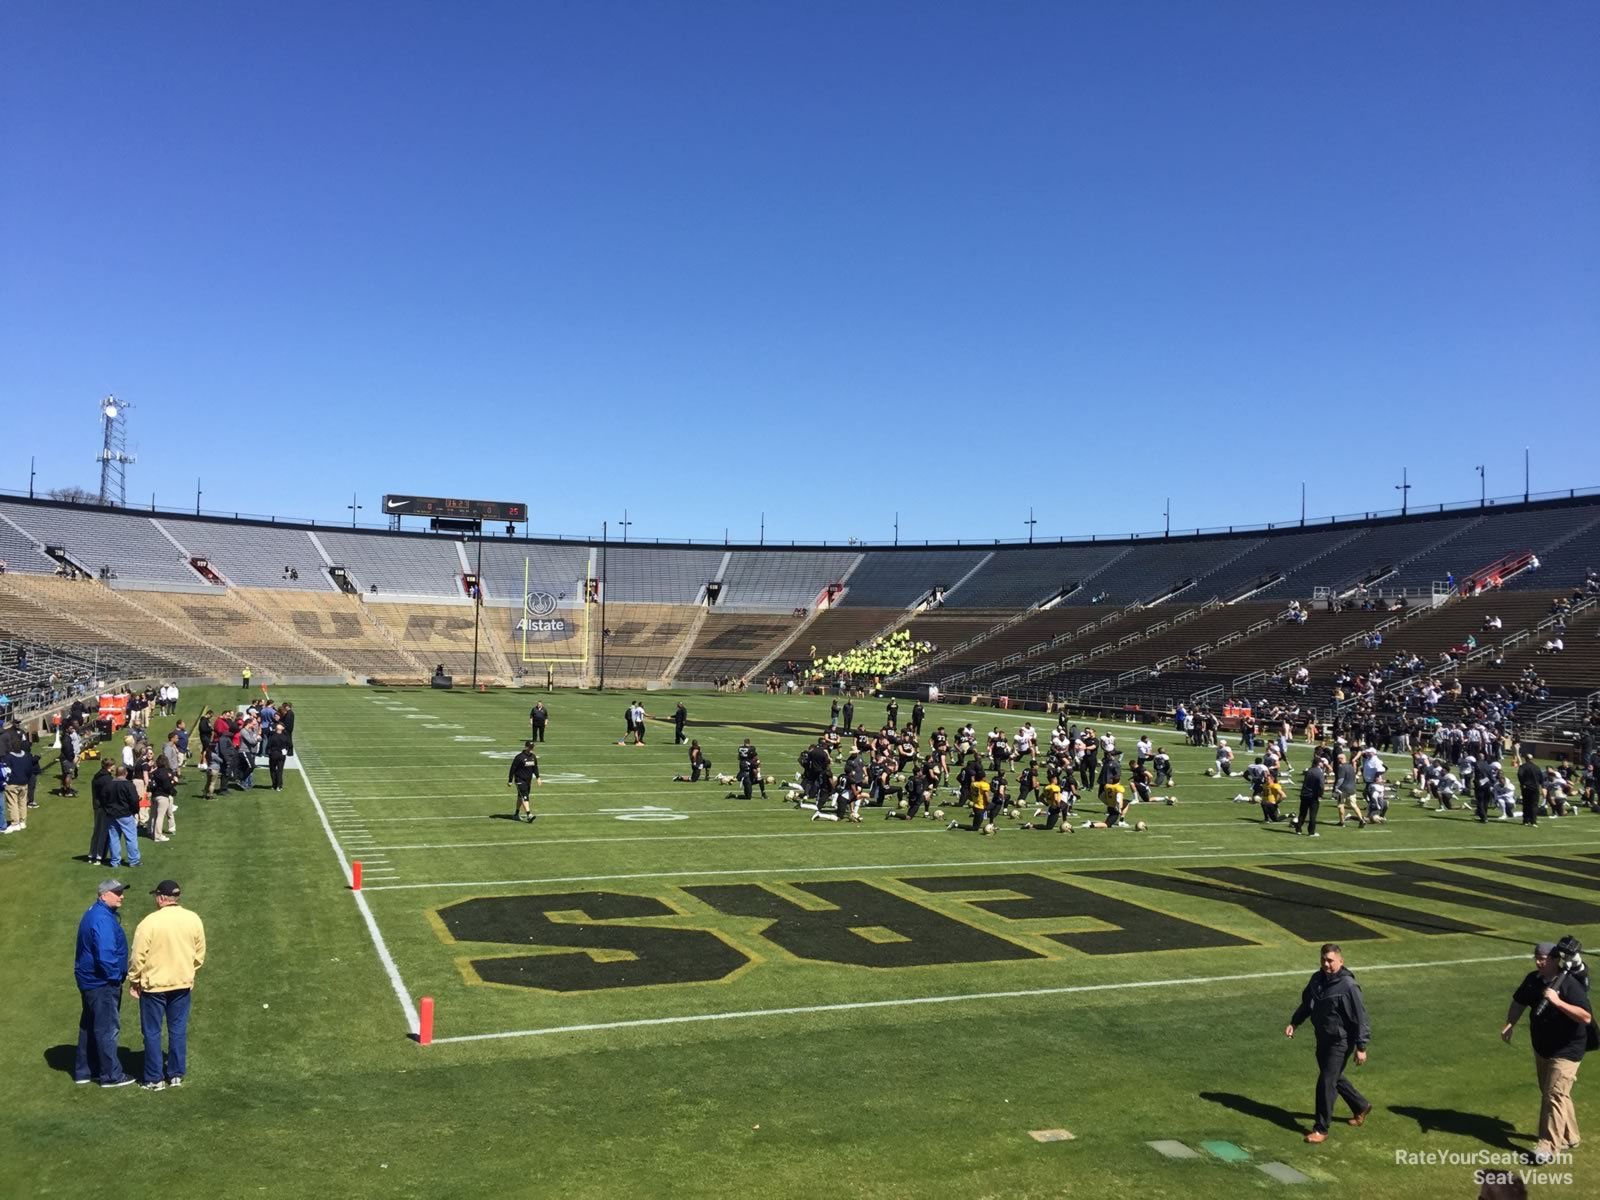 section 30, row 5 seat view  - ross-ade stadium